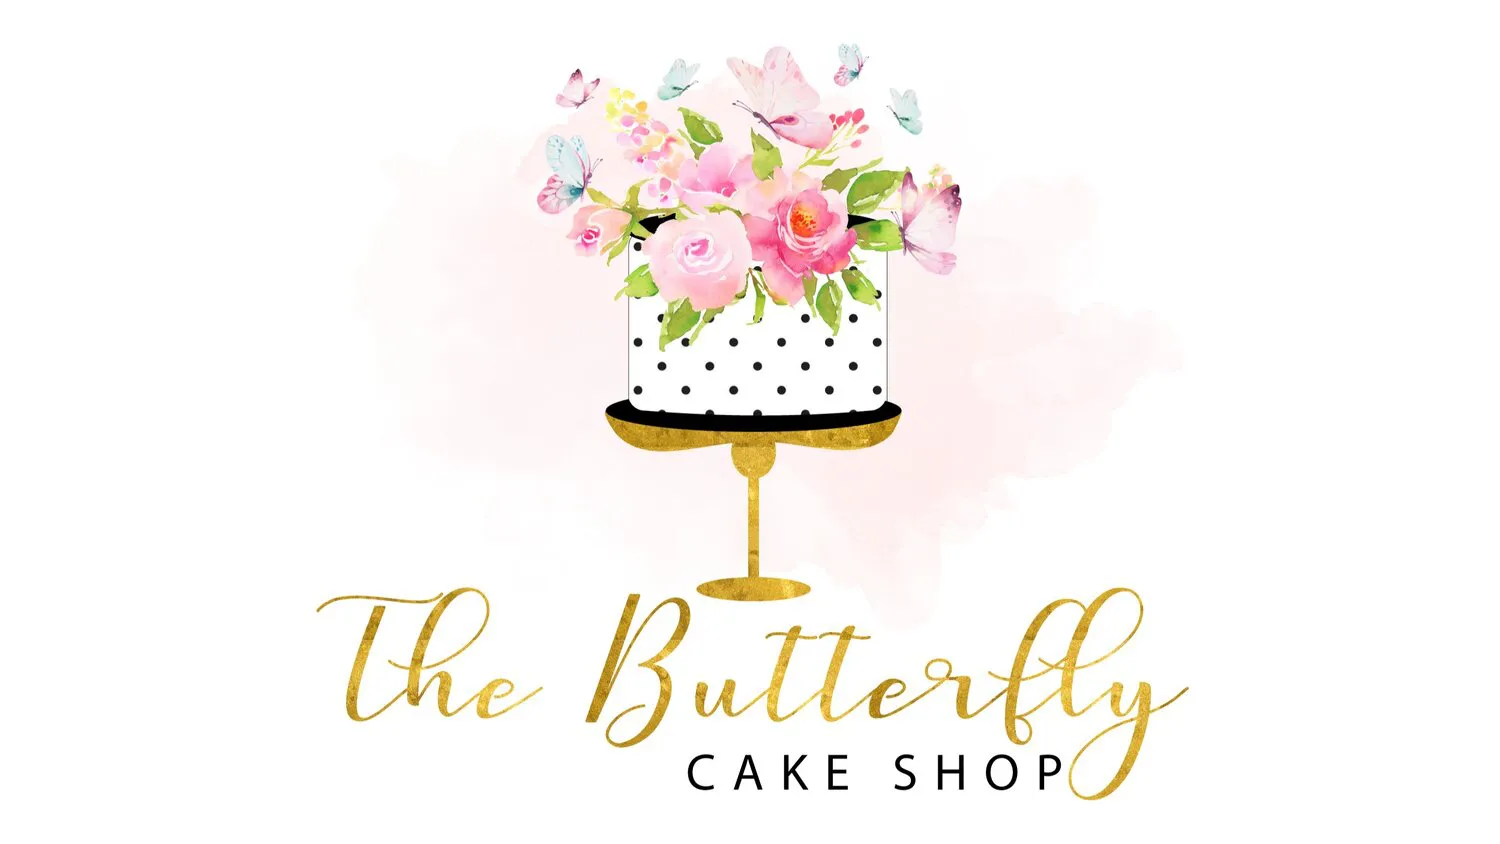  The Butterfly Cake Shop Promo Codes